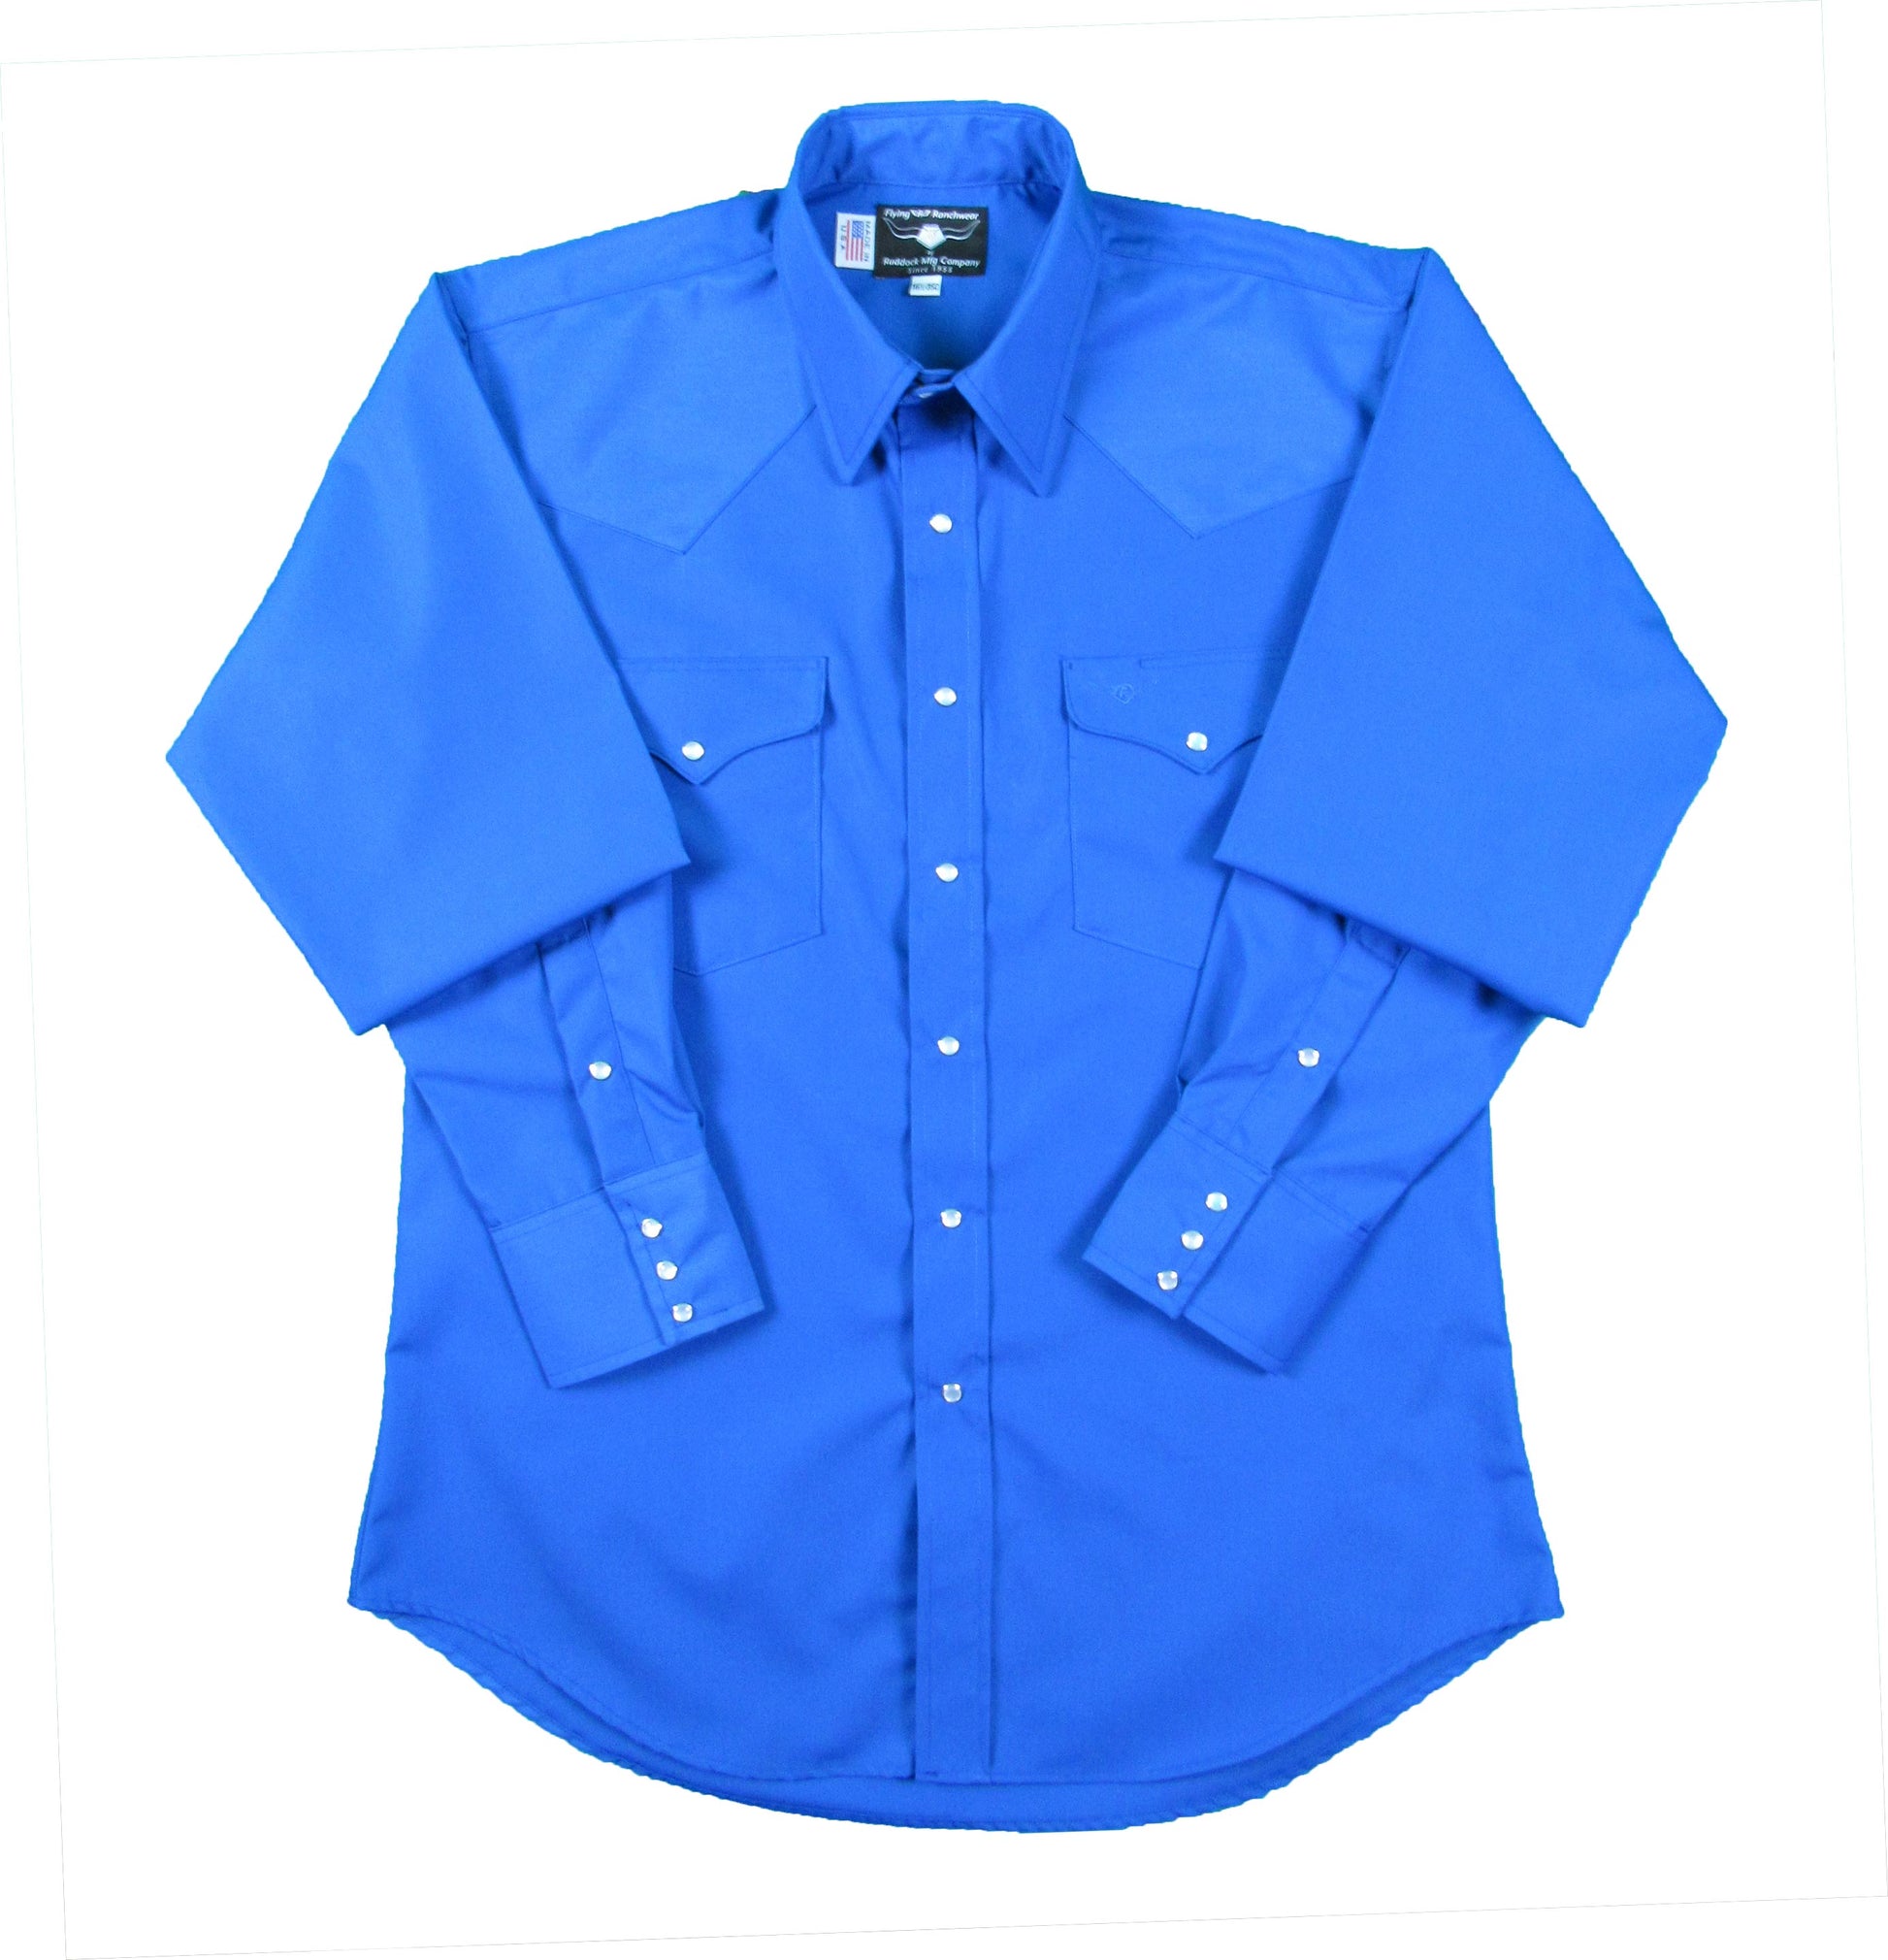 Flying R Ranchwear Rancher Crease shirt in Royal Blue Made in USA with snaps